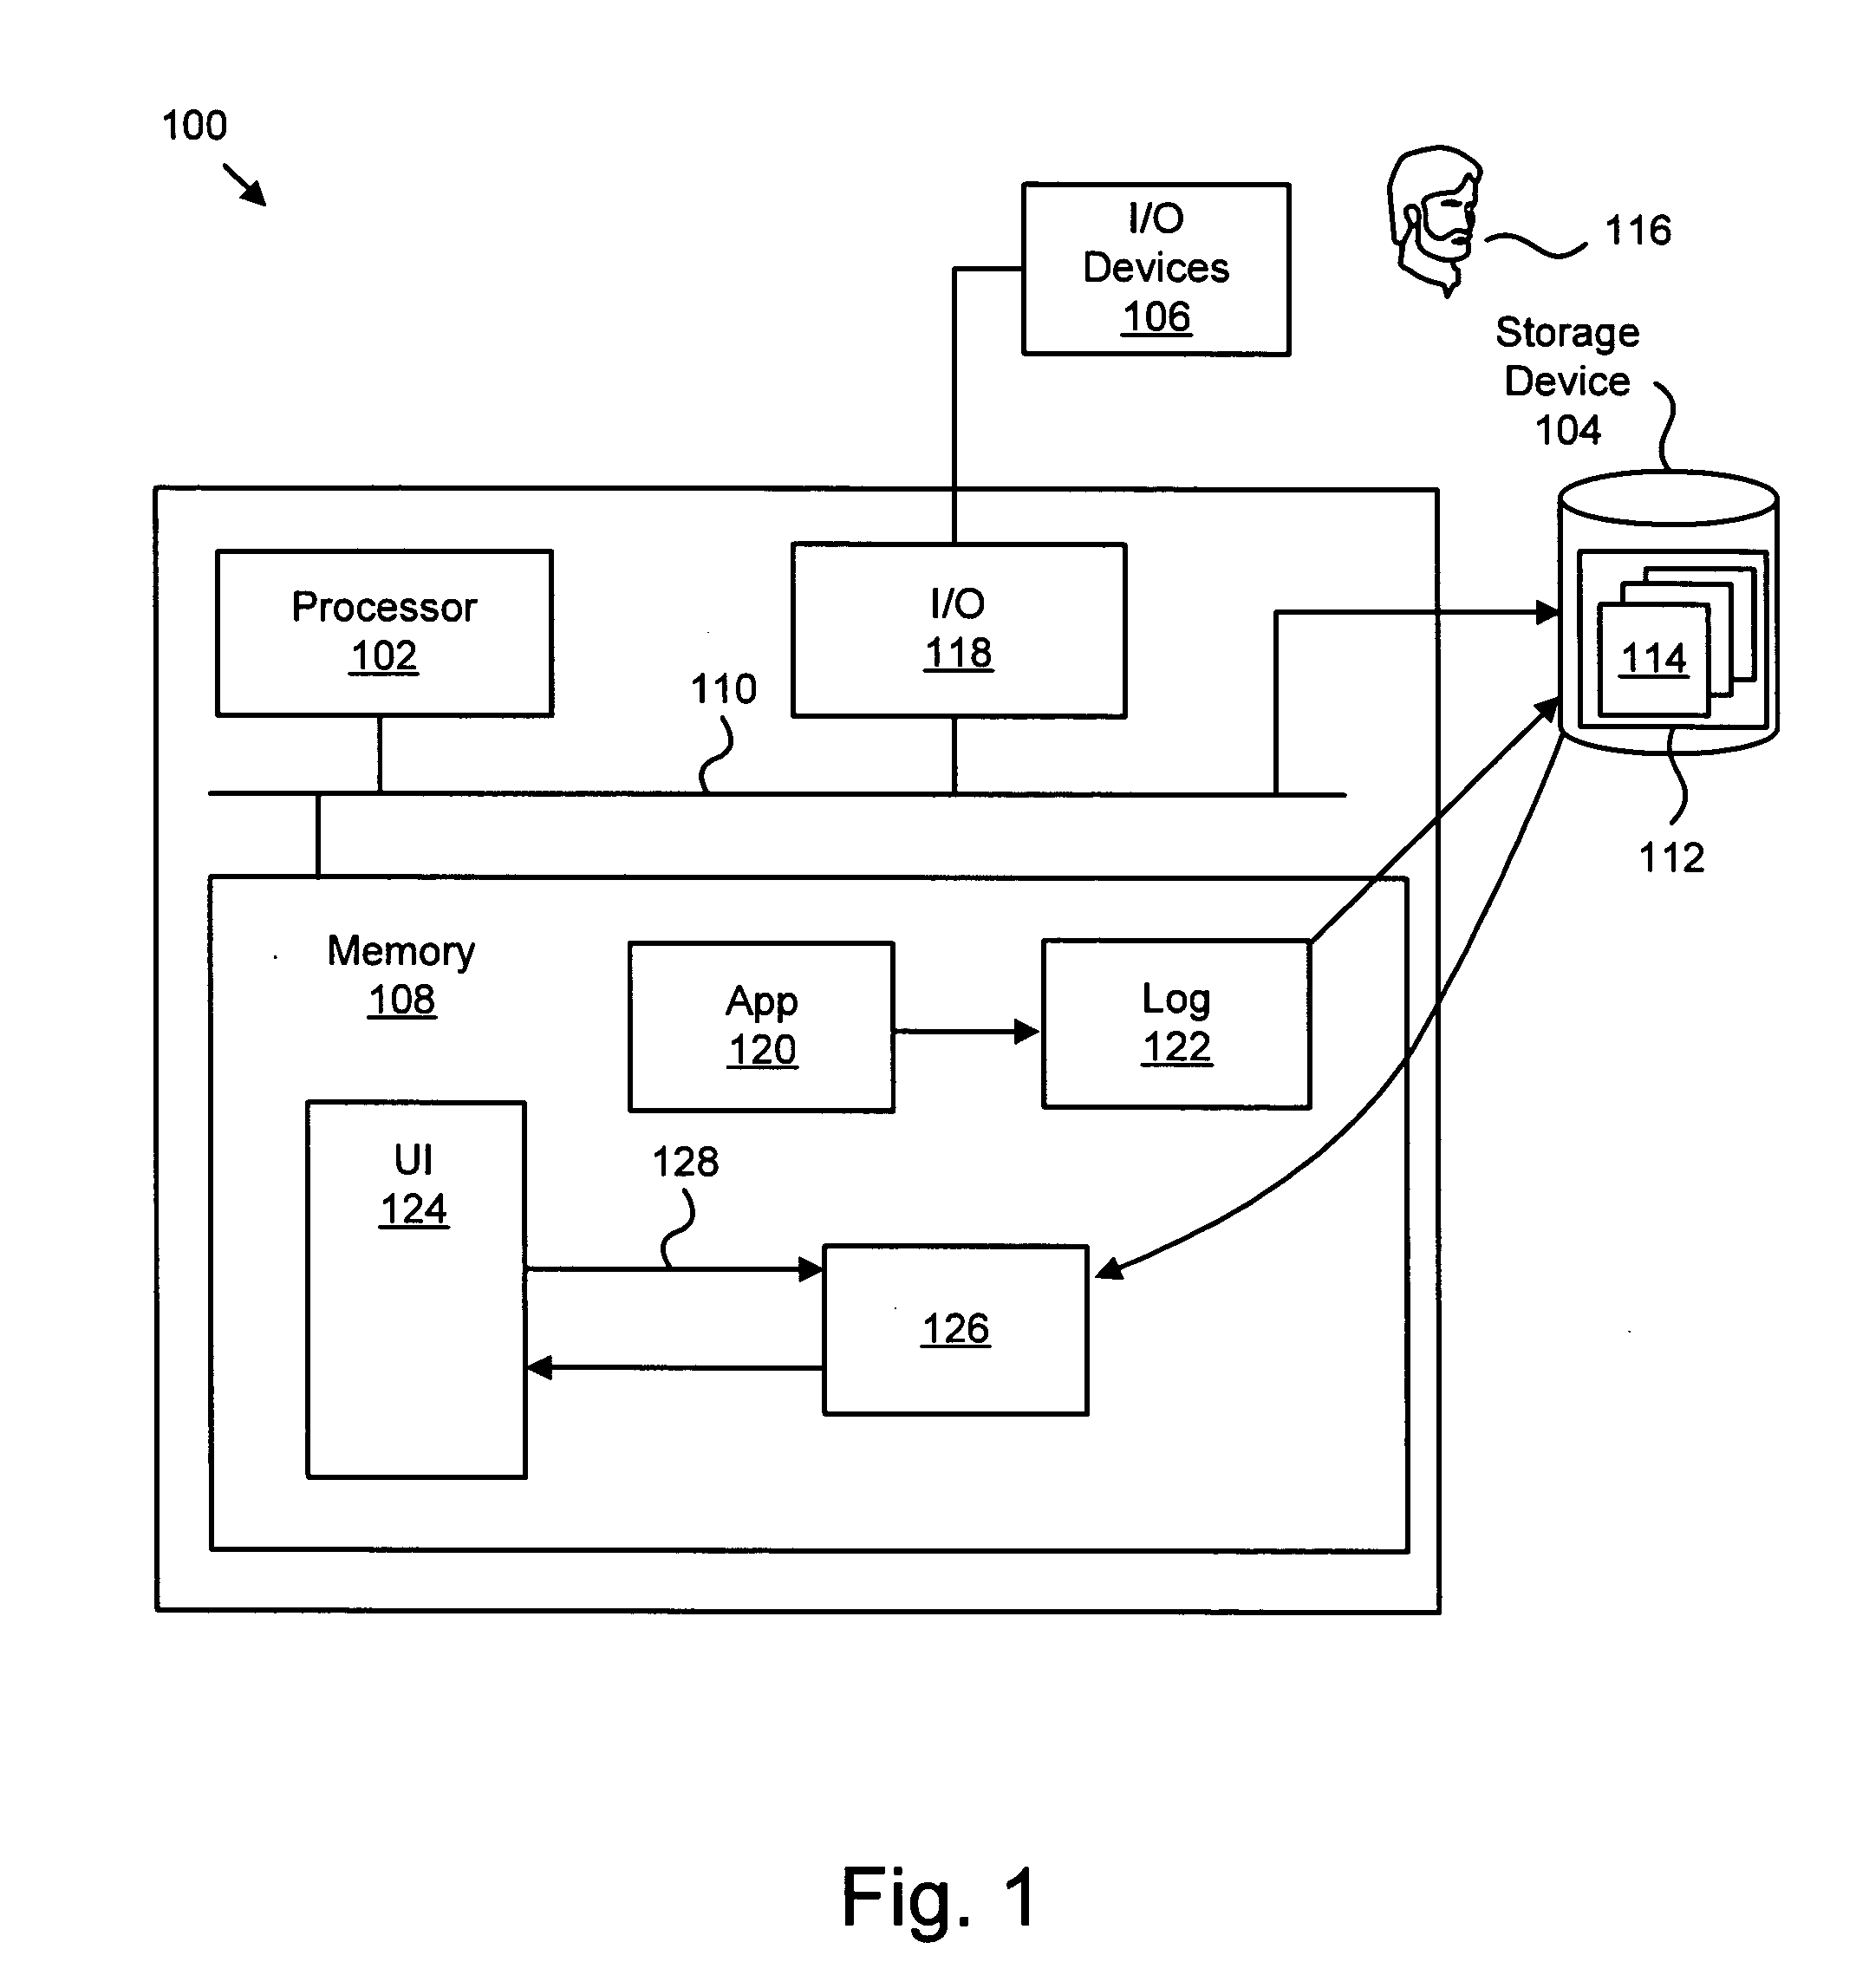 Apparatus, system, and method for condensing reported checkpoint log data